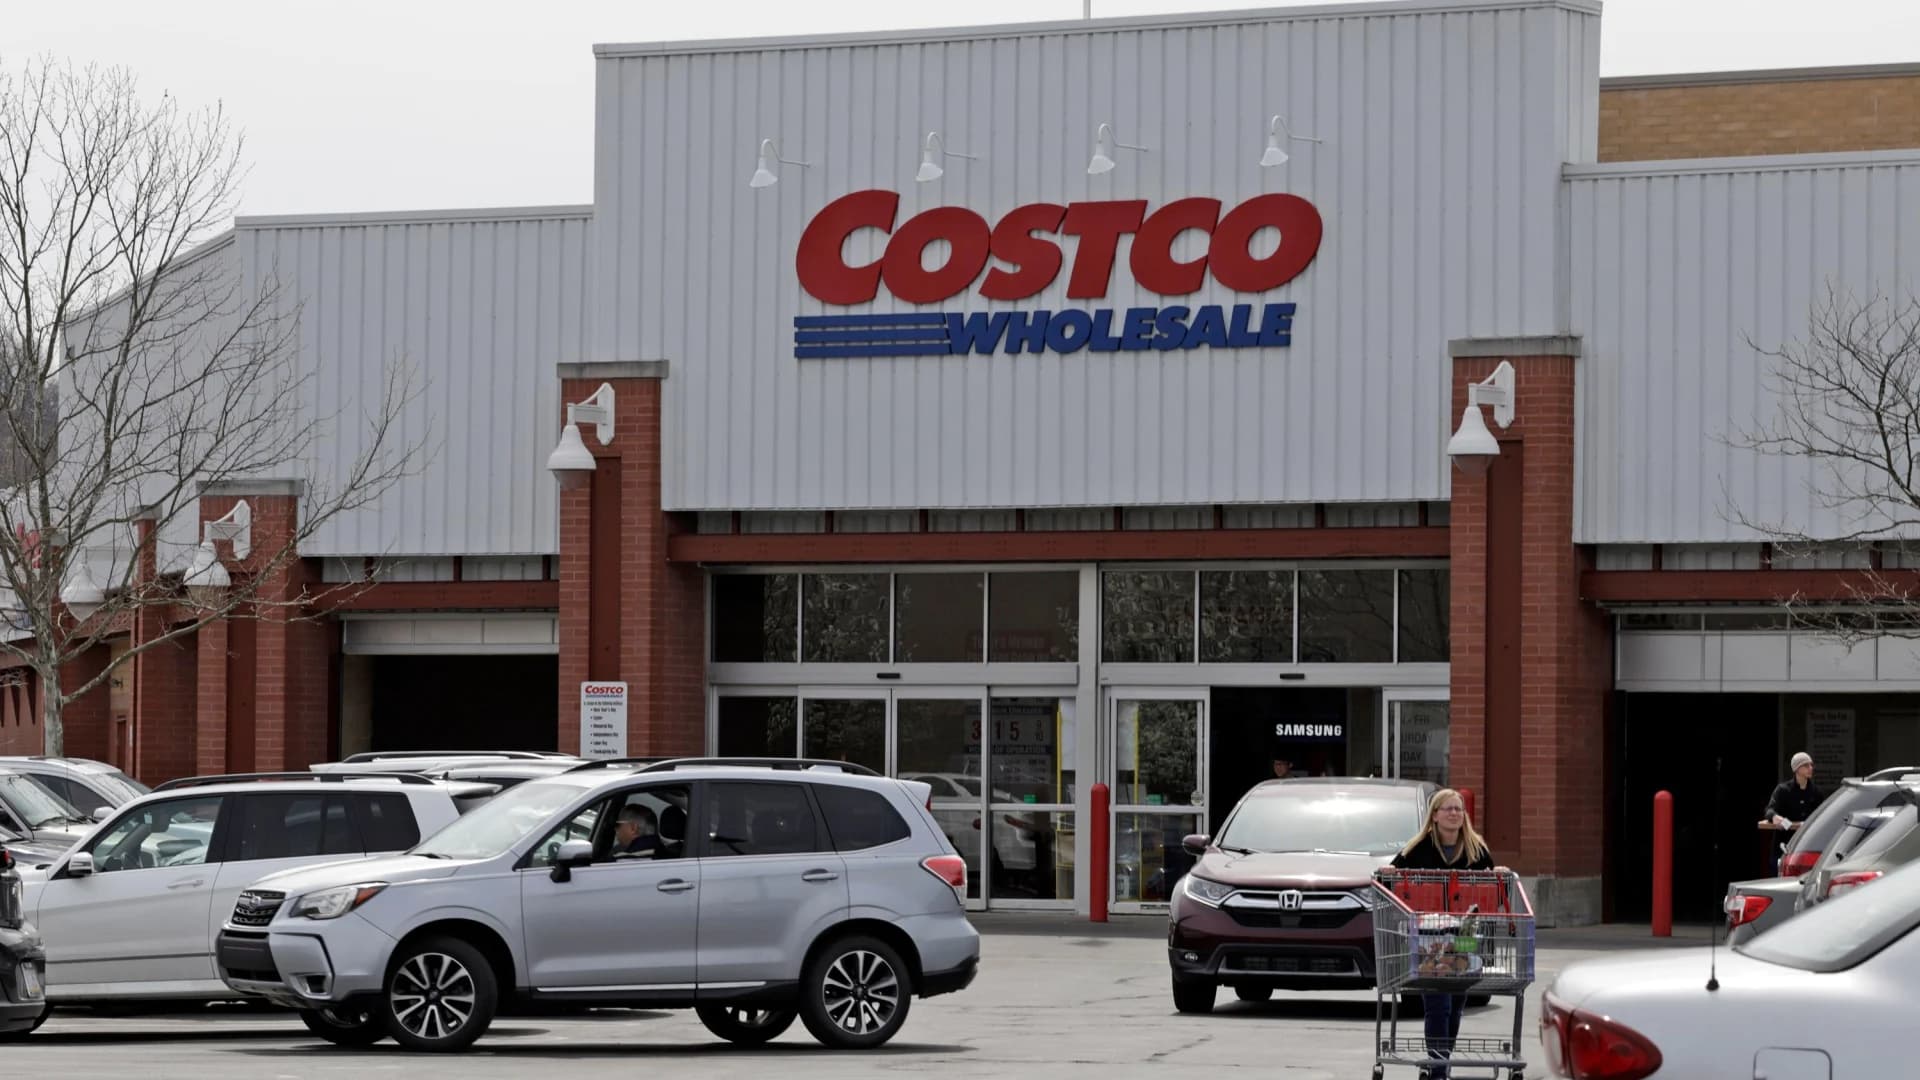 $75 Costco coupon shared on social media a scam, company says